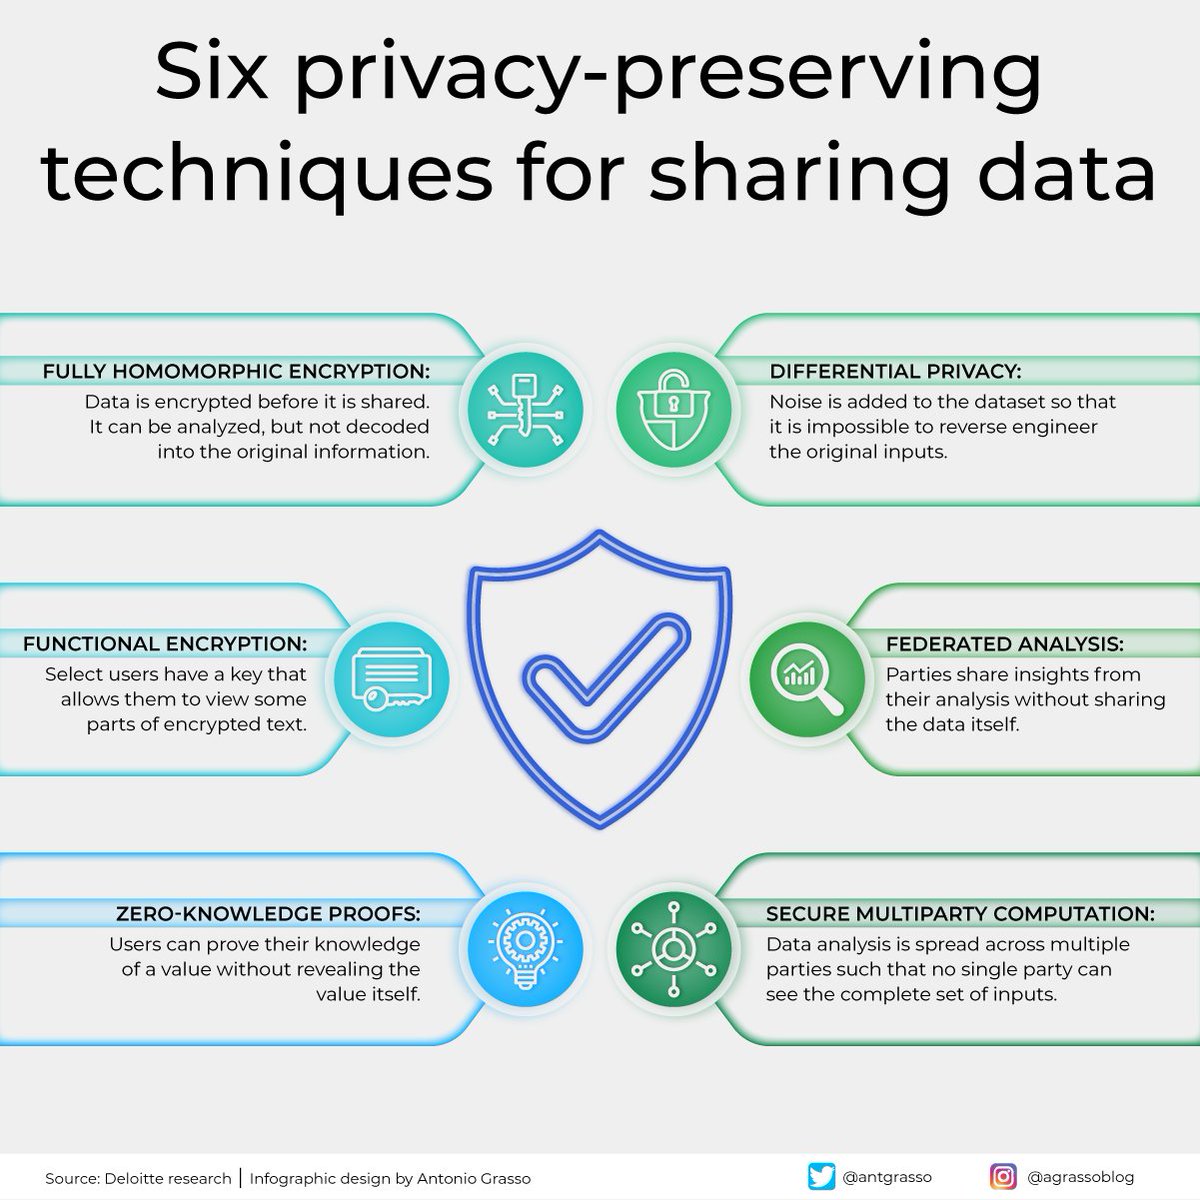 Six techniques for data privacy include encrypted data analysis, obscuring individual data with noise, controlled access to encrypted text, sharing analysis insights, concealing information through proofs, and collective analysis without full data exposure. Microblog @antgrasso